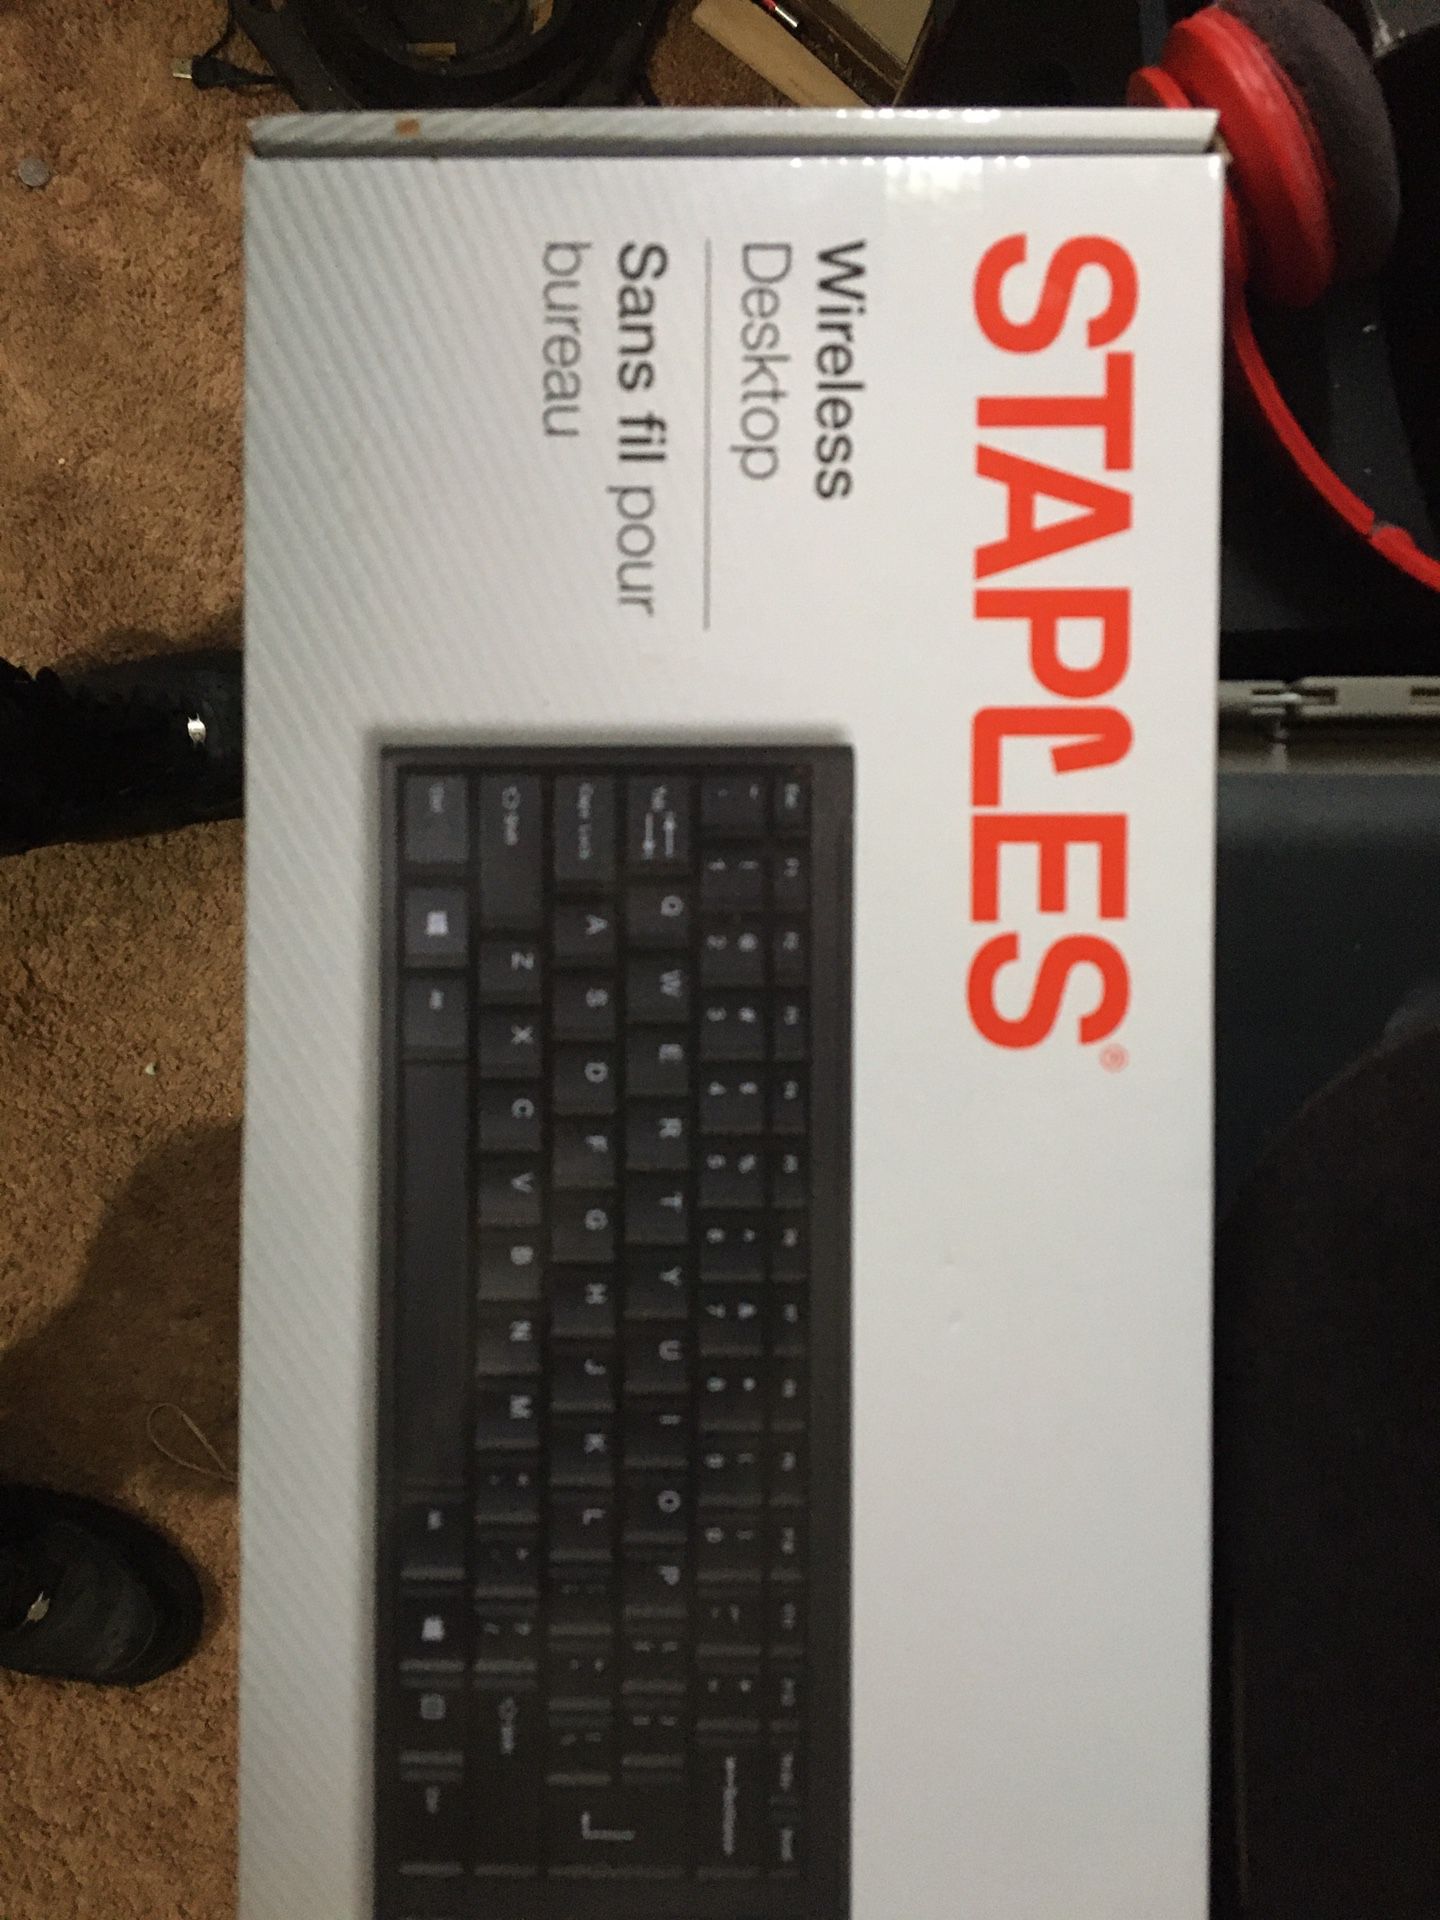 Wireless keyboard and mouse combo brand new unopened box